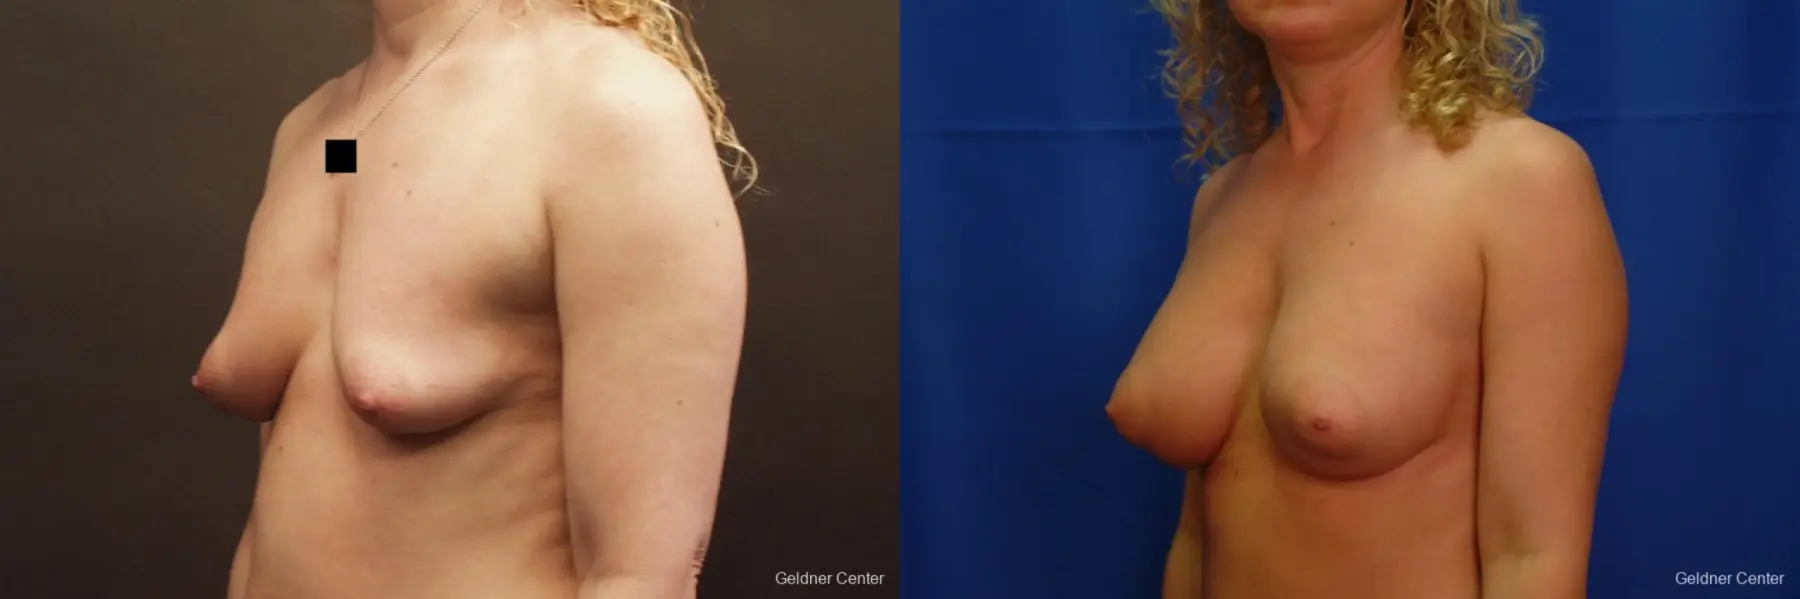 Breast Augmentation Lake Shore Dr, Chicago 2436 - Before and After 5